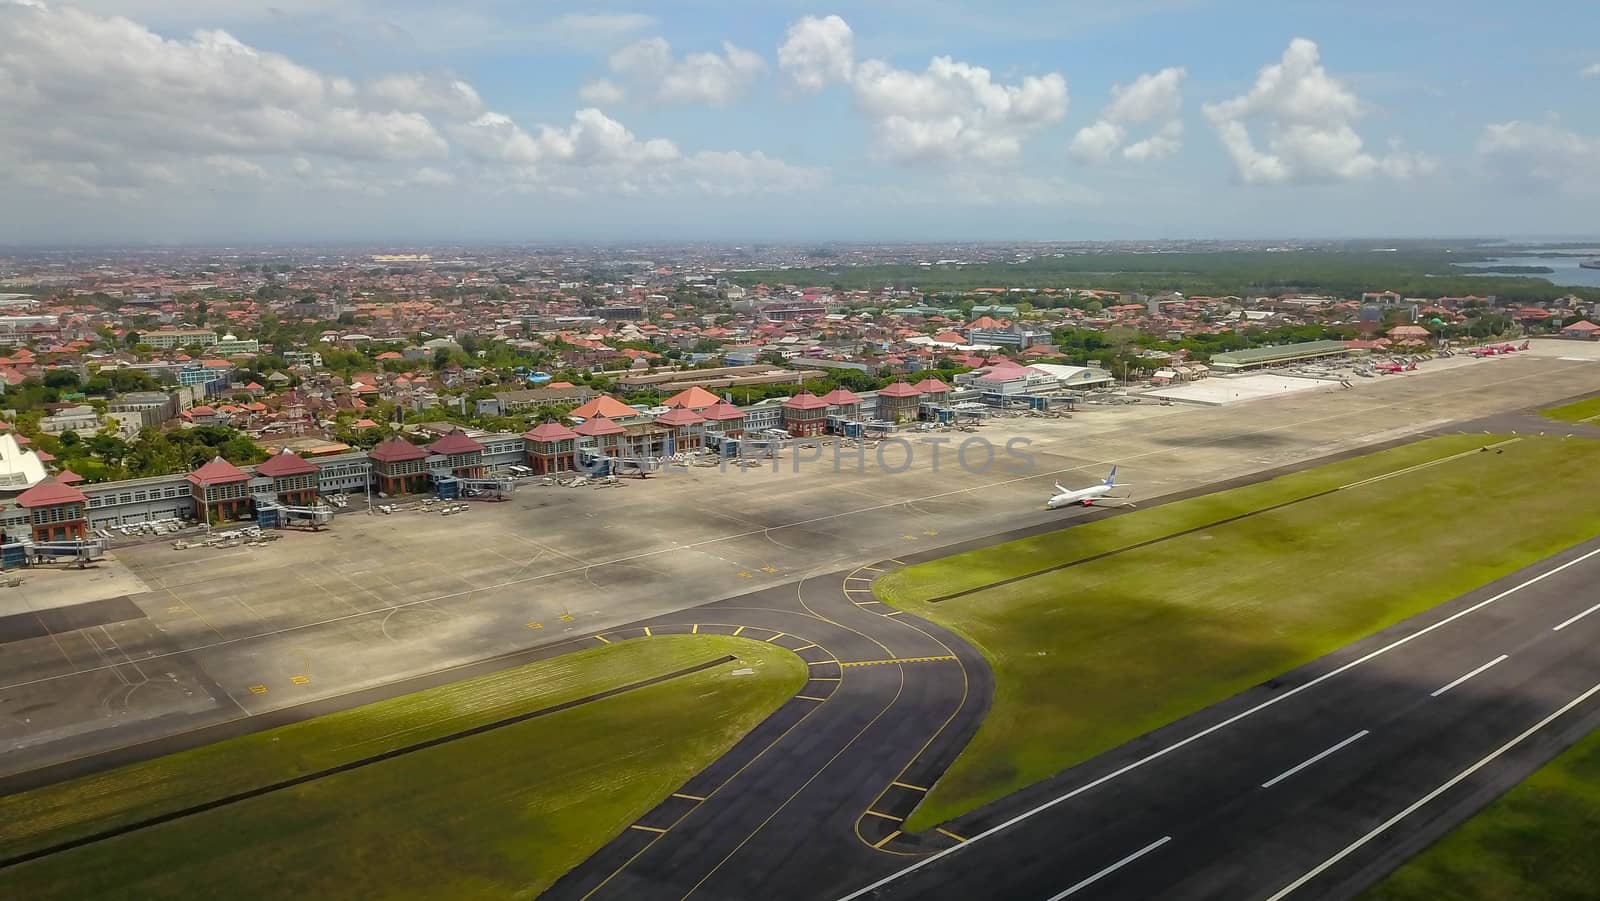 Airport - aerial view with runways, taxis, grass and air-crafts. Aerial view to Ngurah Rai airport. The plane goes down the runway.